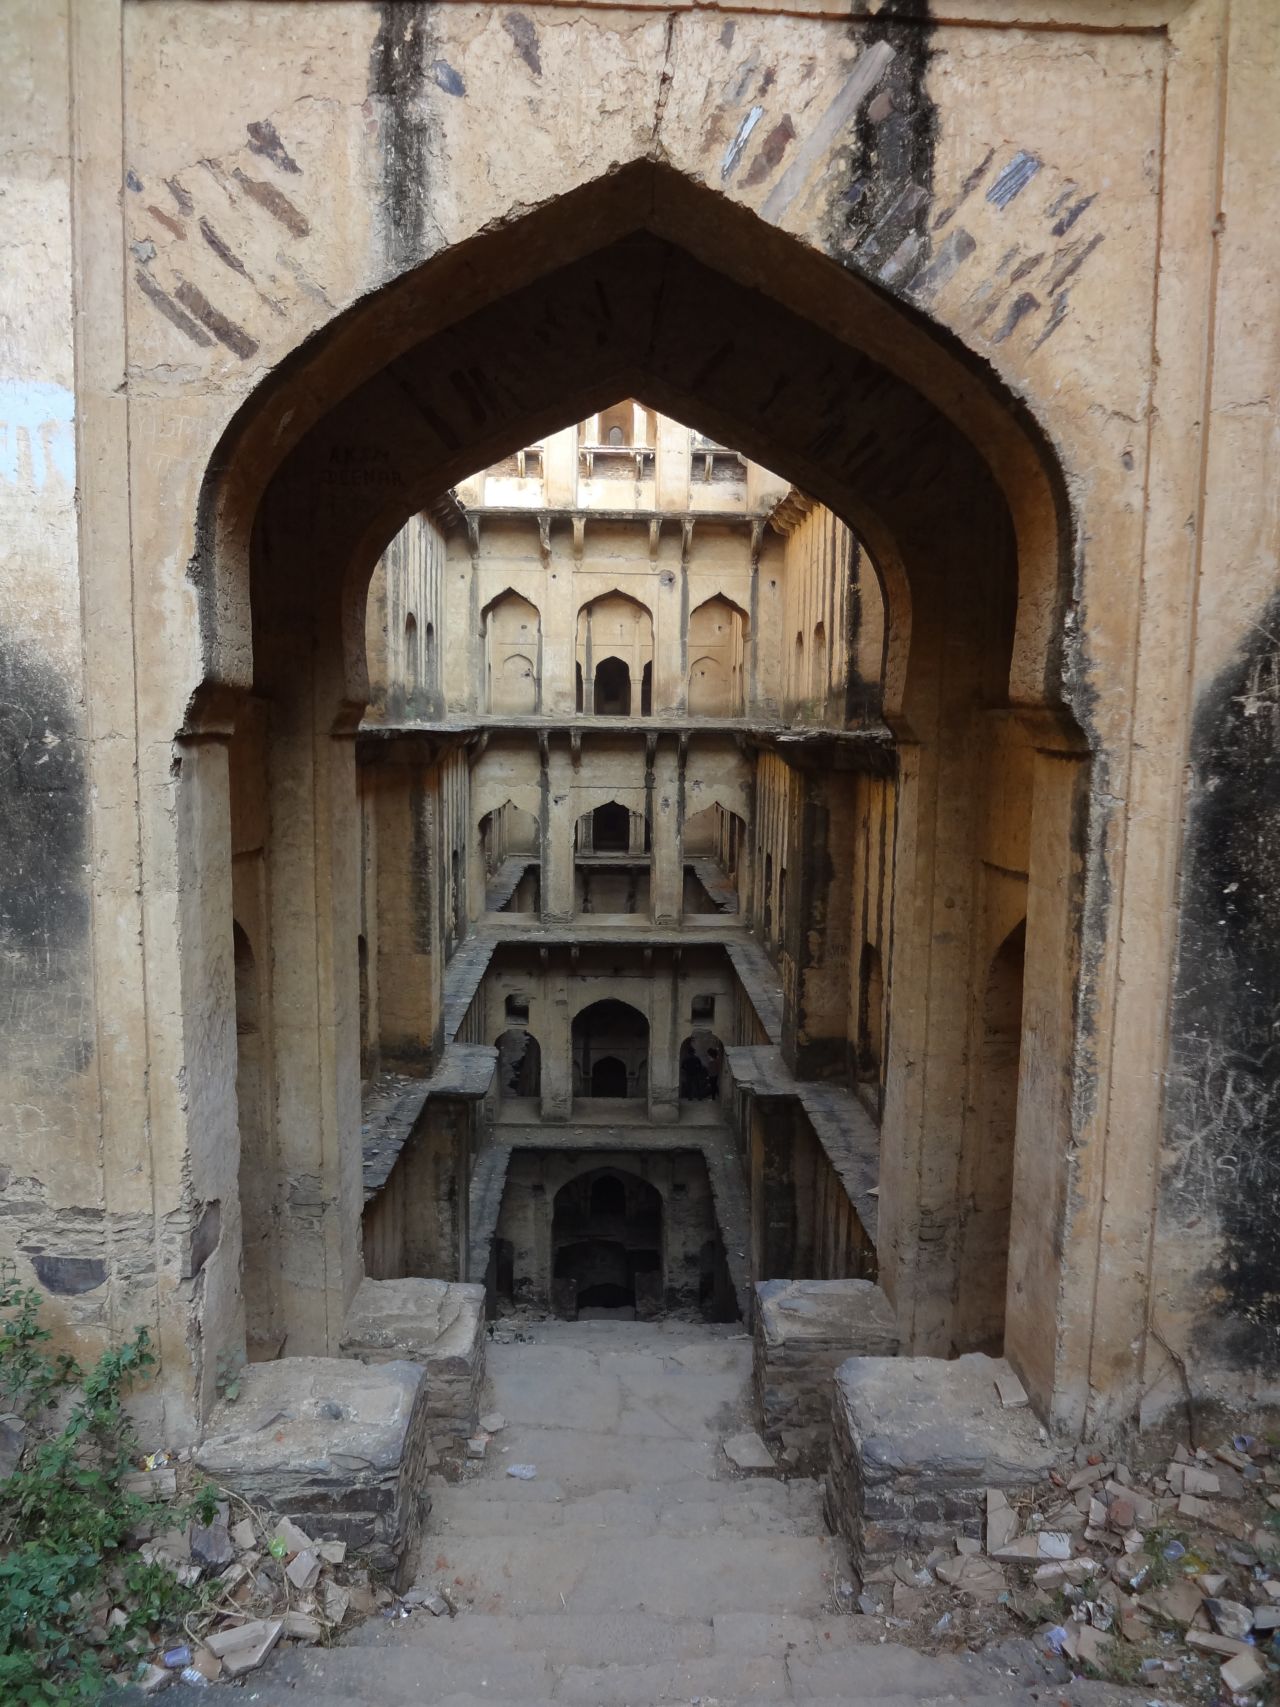 "This is where I knew I had slipped over the line from 'enchanted' to 'obsessed.' Neemrana is very deep -- 9 stories -- and dangerously decrepit, but one of the most marvelous structures I've ever seen. Ever."